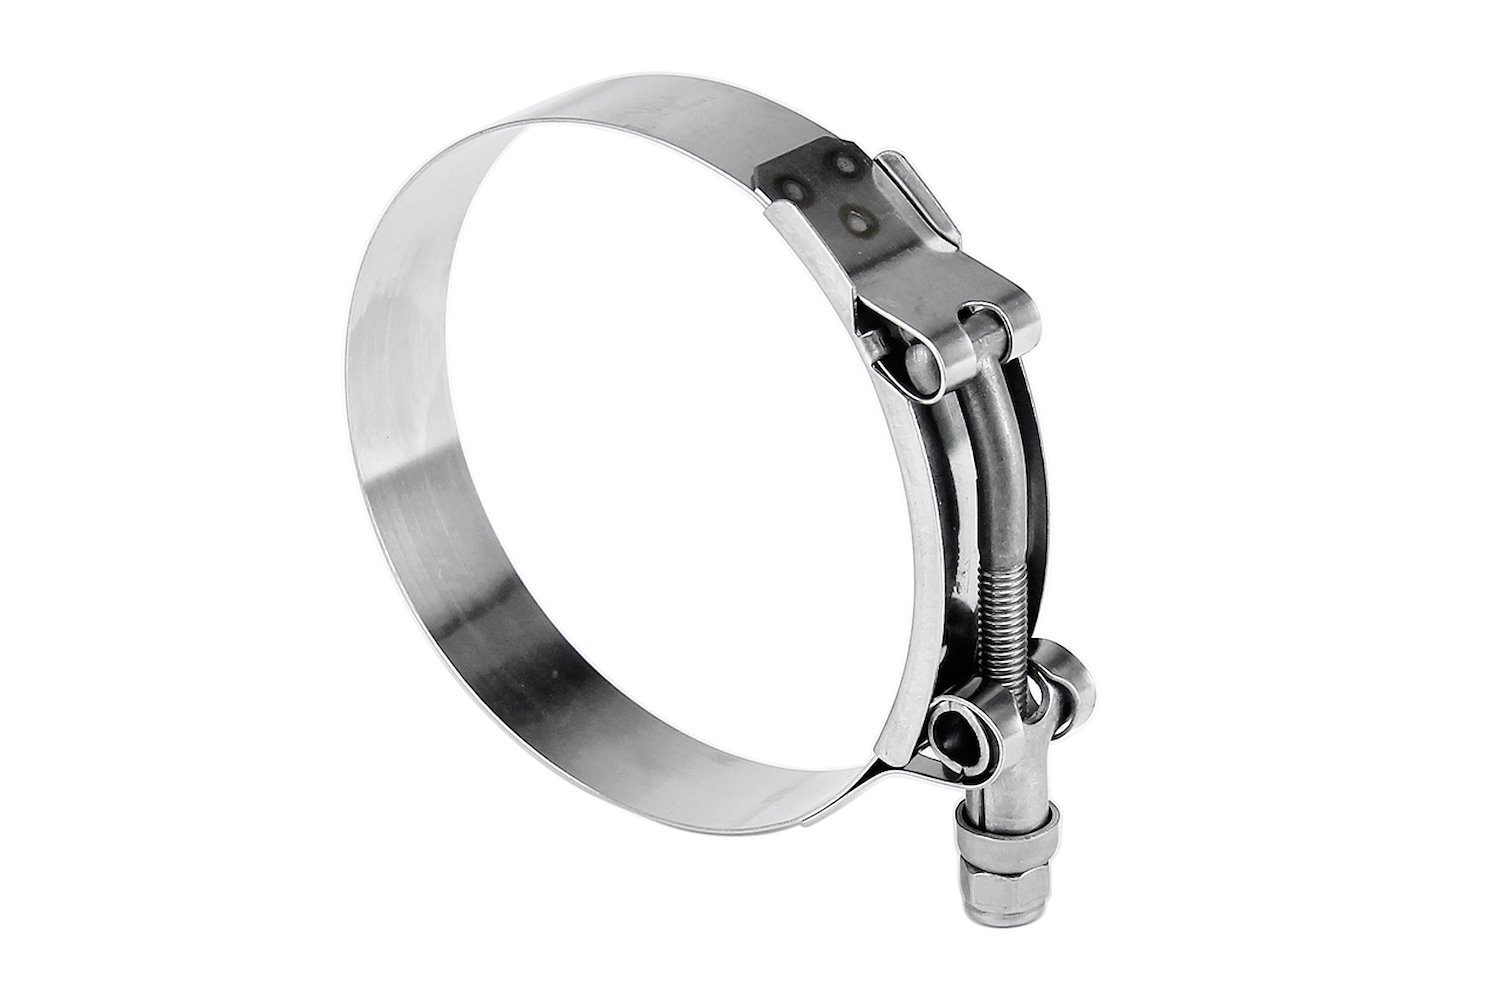 316-SSTC-54-62 100-Percent Marine Grade Stainless Steel T-Bolt Hose Clamp, Size #40, Range: 2.13 in.- 2.44 in.